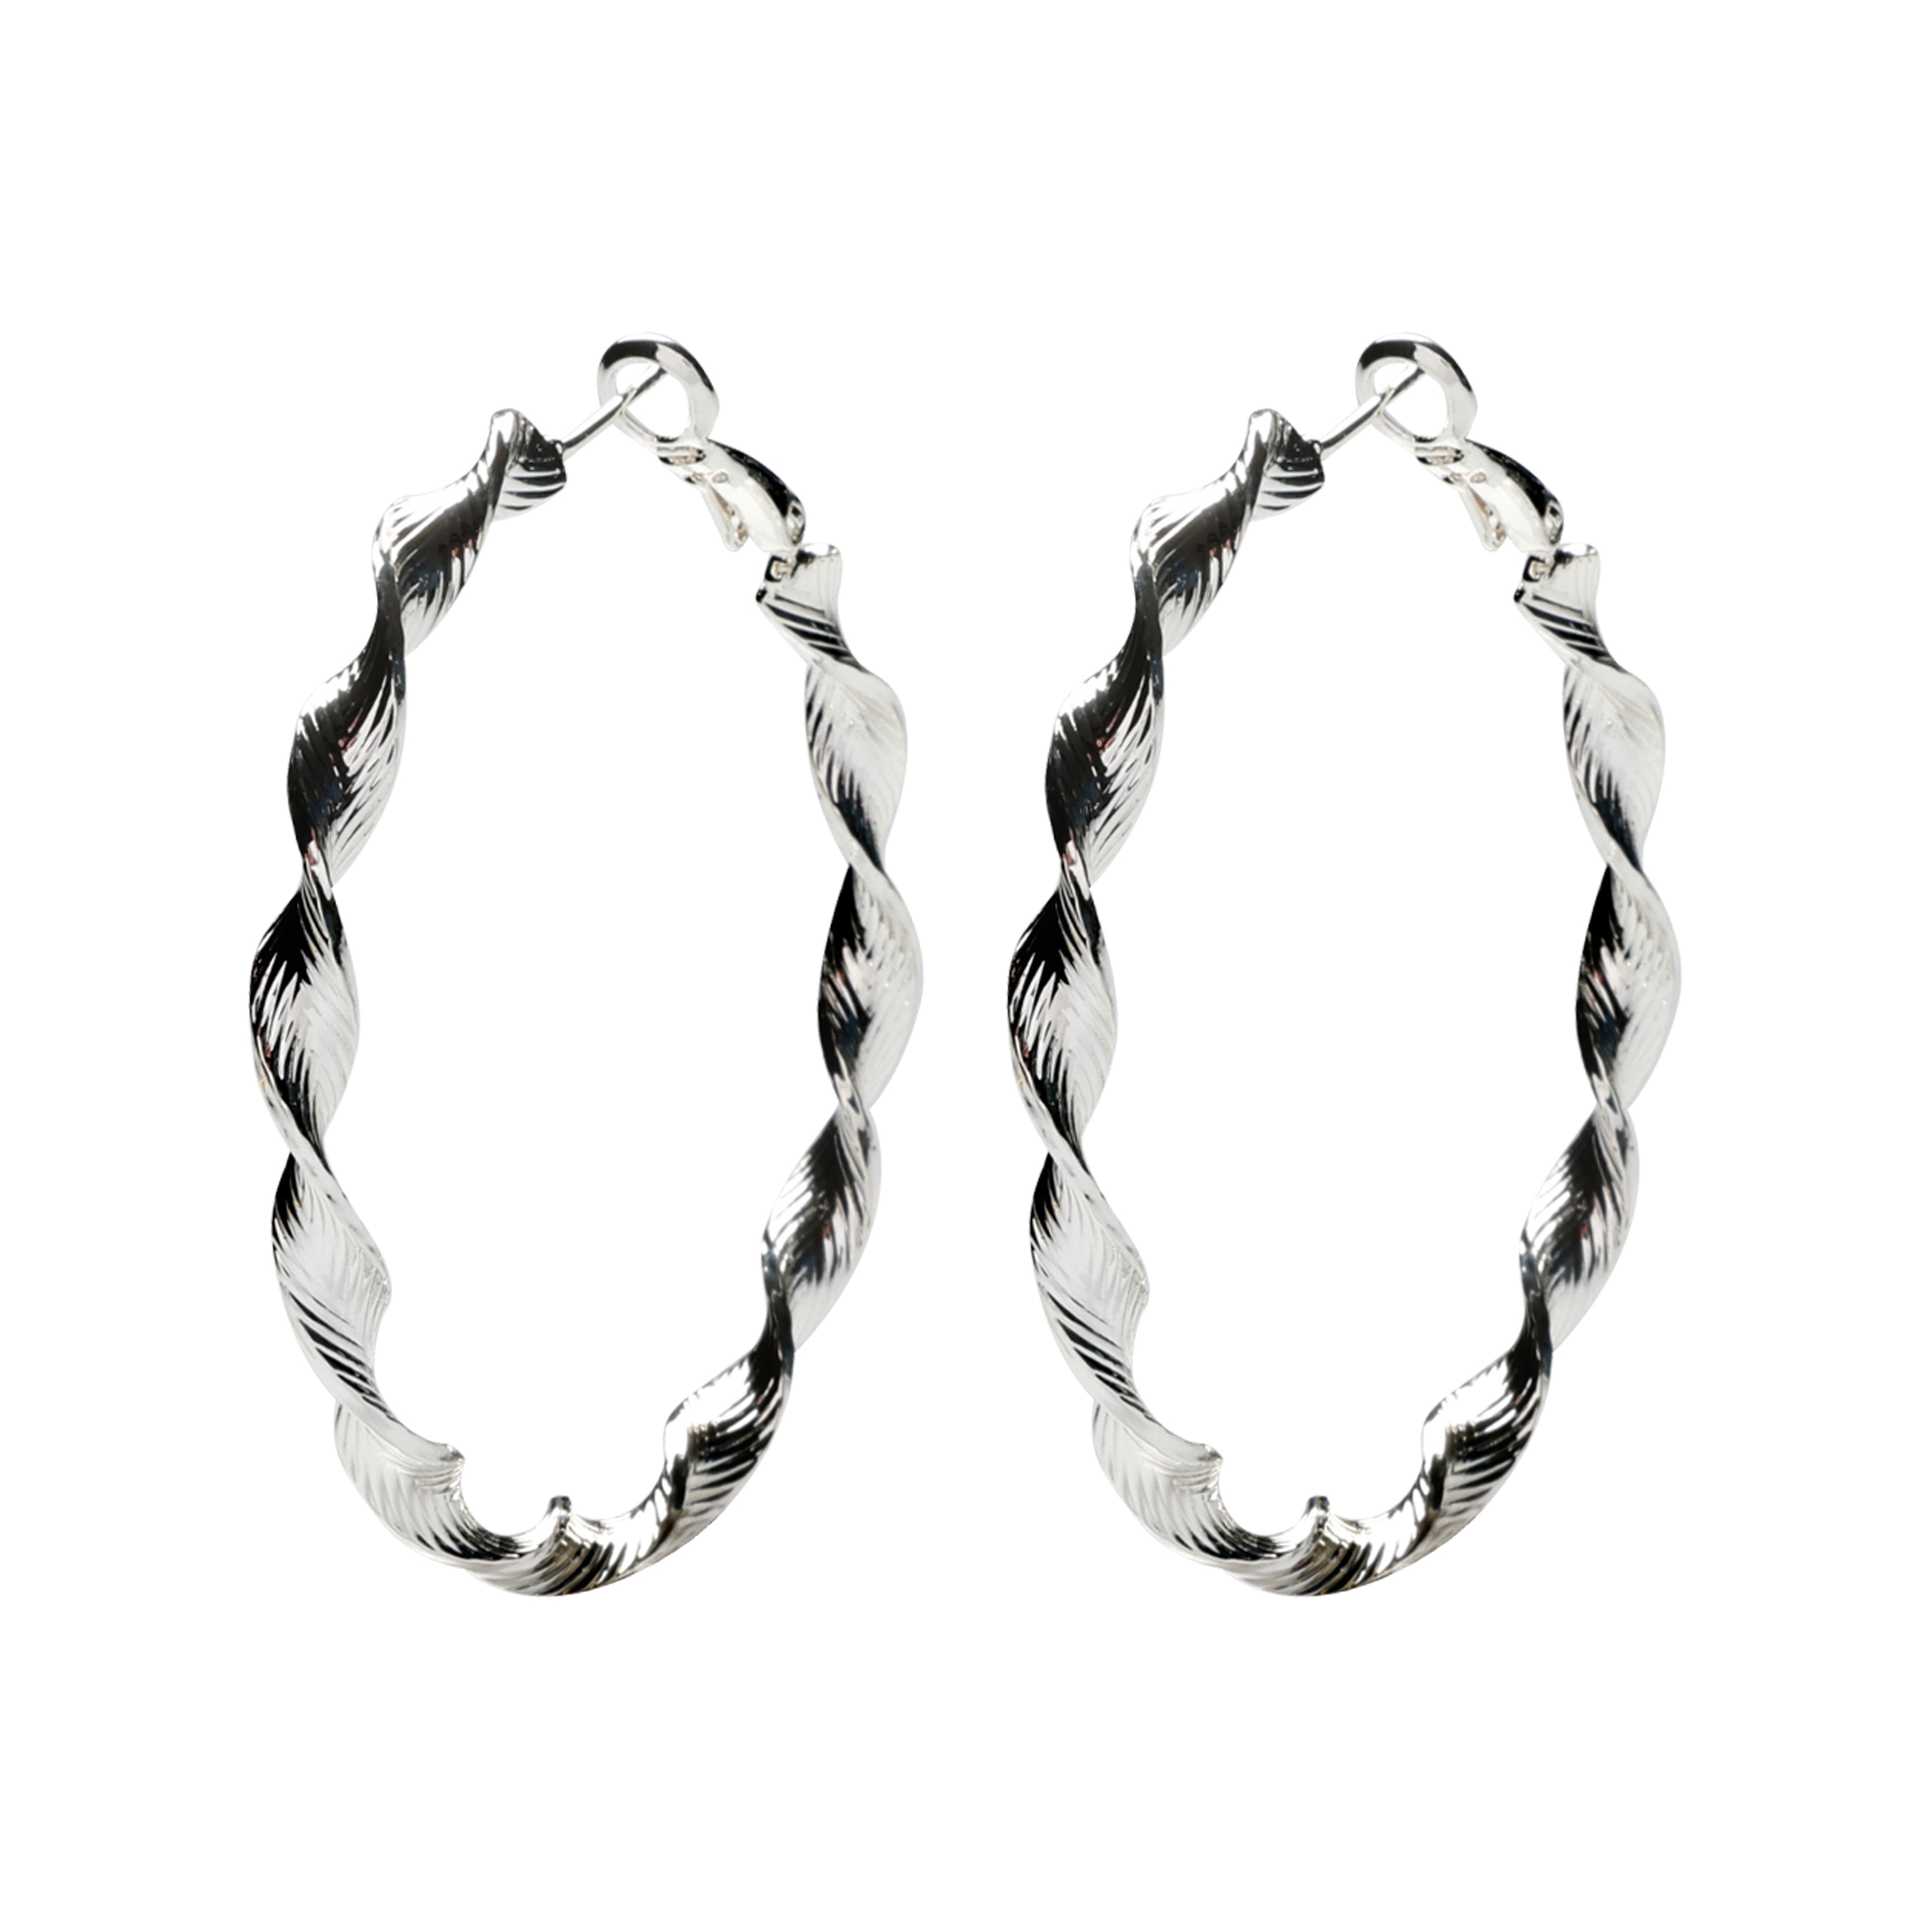 Twisted hoops - 50mm, 925S Sterling silver plated, 1 pair